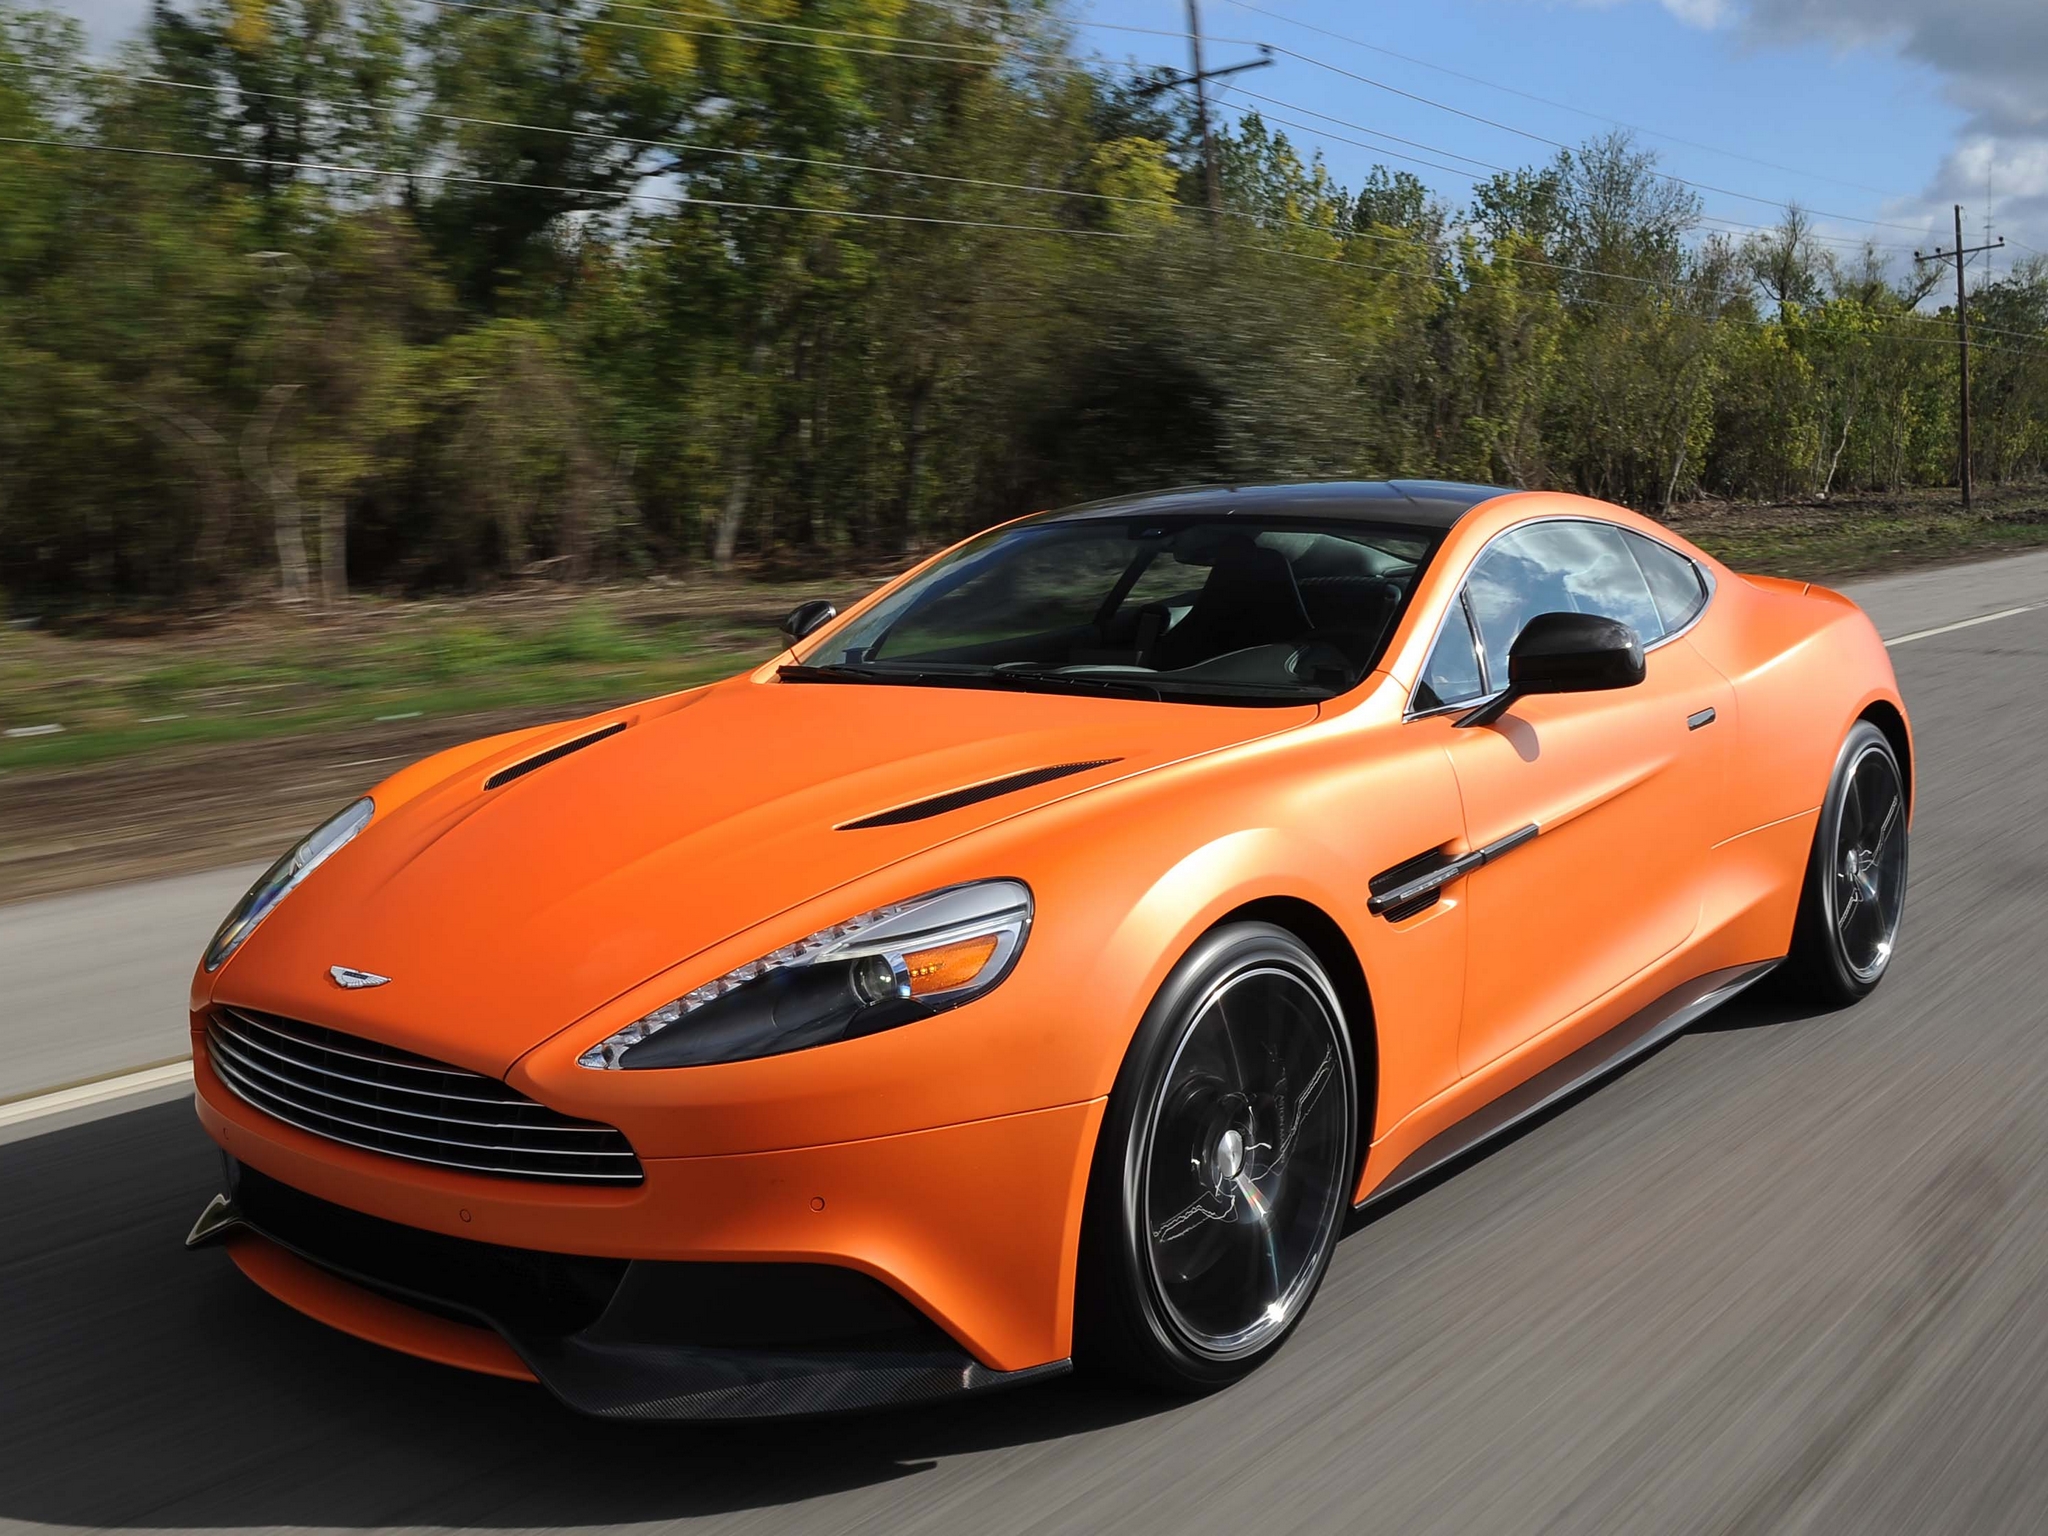 2048 × 1536 http://www.autowp.ru/pictures/aston_martin/vanquish/aston_martin_vanquish_us-spec_1.jpg